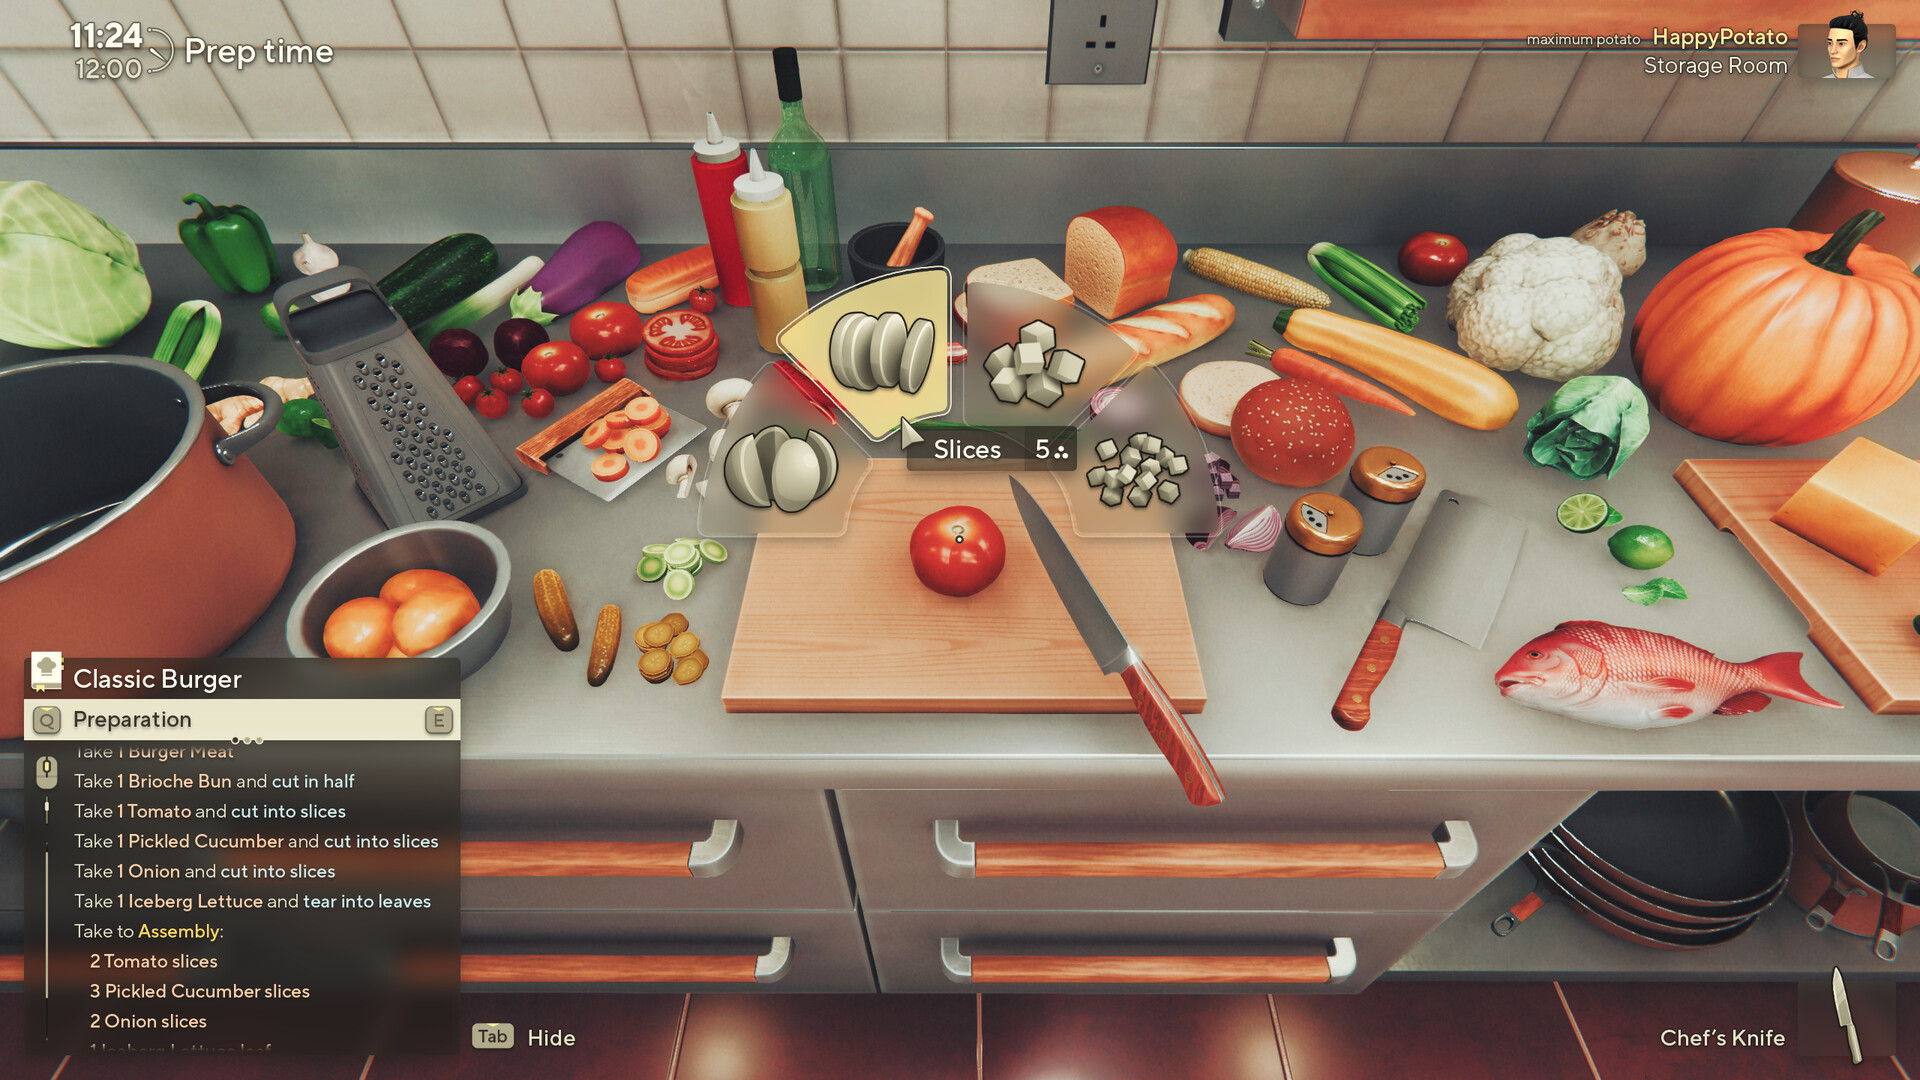 Cooking Simulator 2: Better Together no Steam